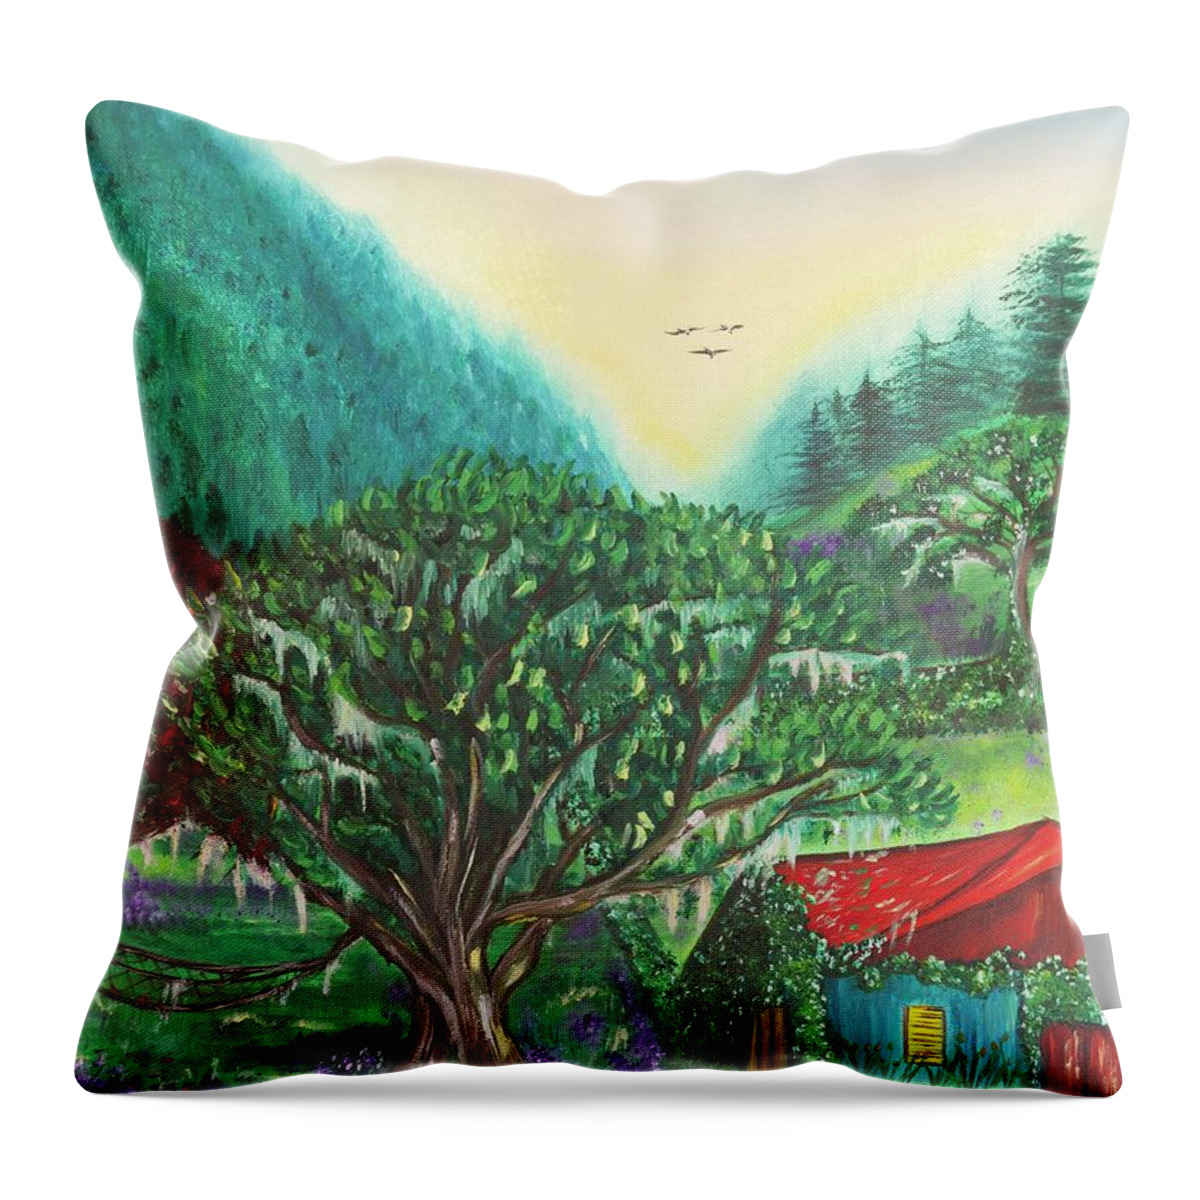 Sanctuary Throw Pillow featuring the painting Sanctuary by Neslihan Ergul Colley